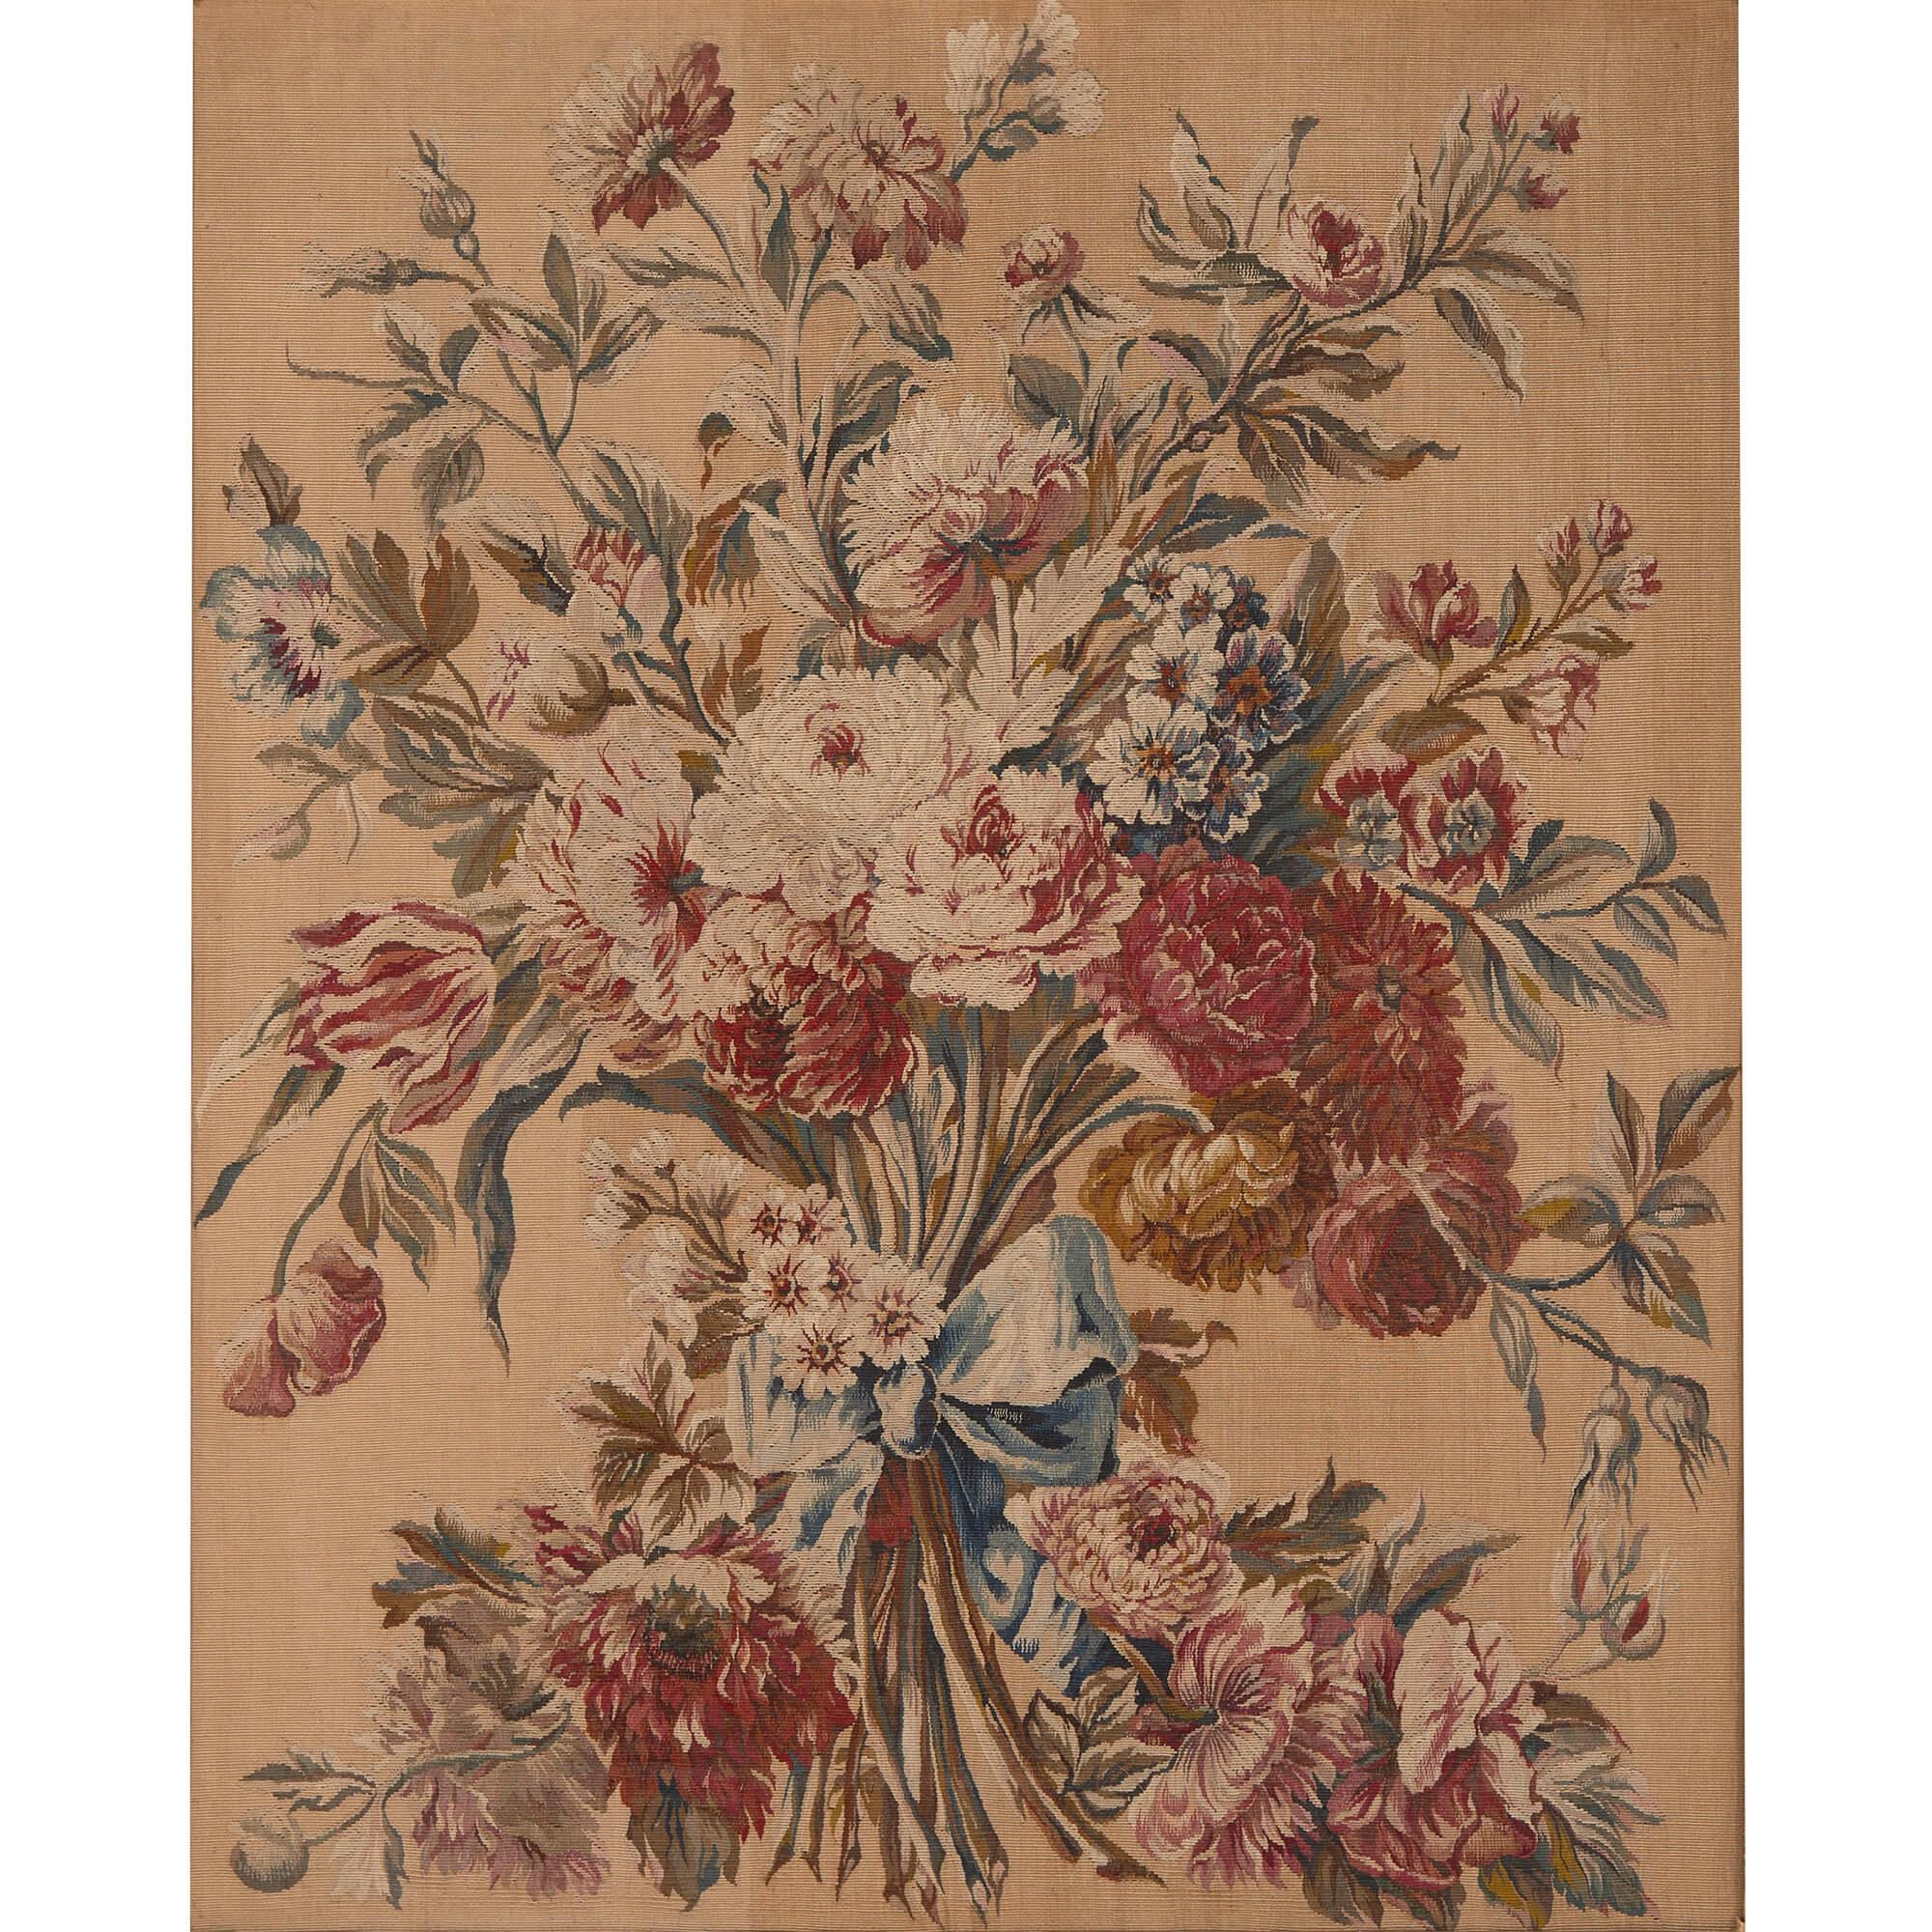 A large and rare Louis XV period frame Beauvais tapestry panel
French, circa 1760
Frame: Height 107cm, width 92cm, depth 8cm
Panel: Height 82cm, width 67cm

This superb piece is an exceptional Louis XV period tapestry panel, by the Manufacture